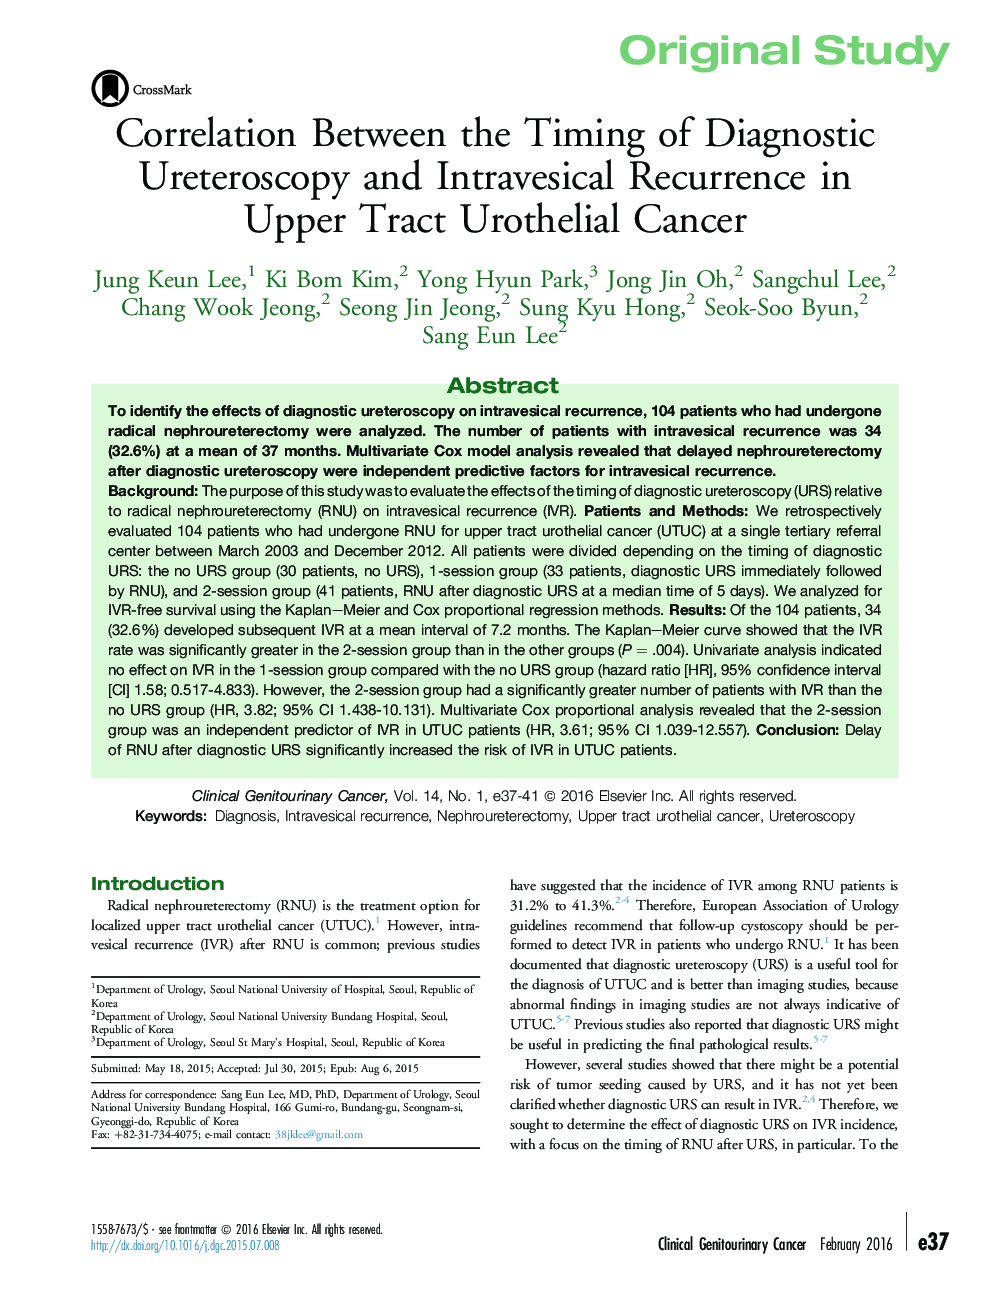 Correlation Between the Timing of Diagnostic Ureteroscopy and Intravesical Recurrence in Upper Tract Urothelial Cancer